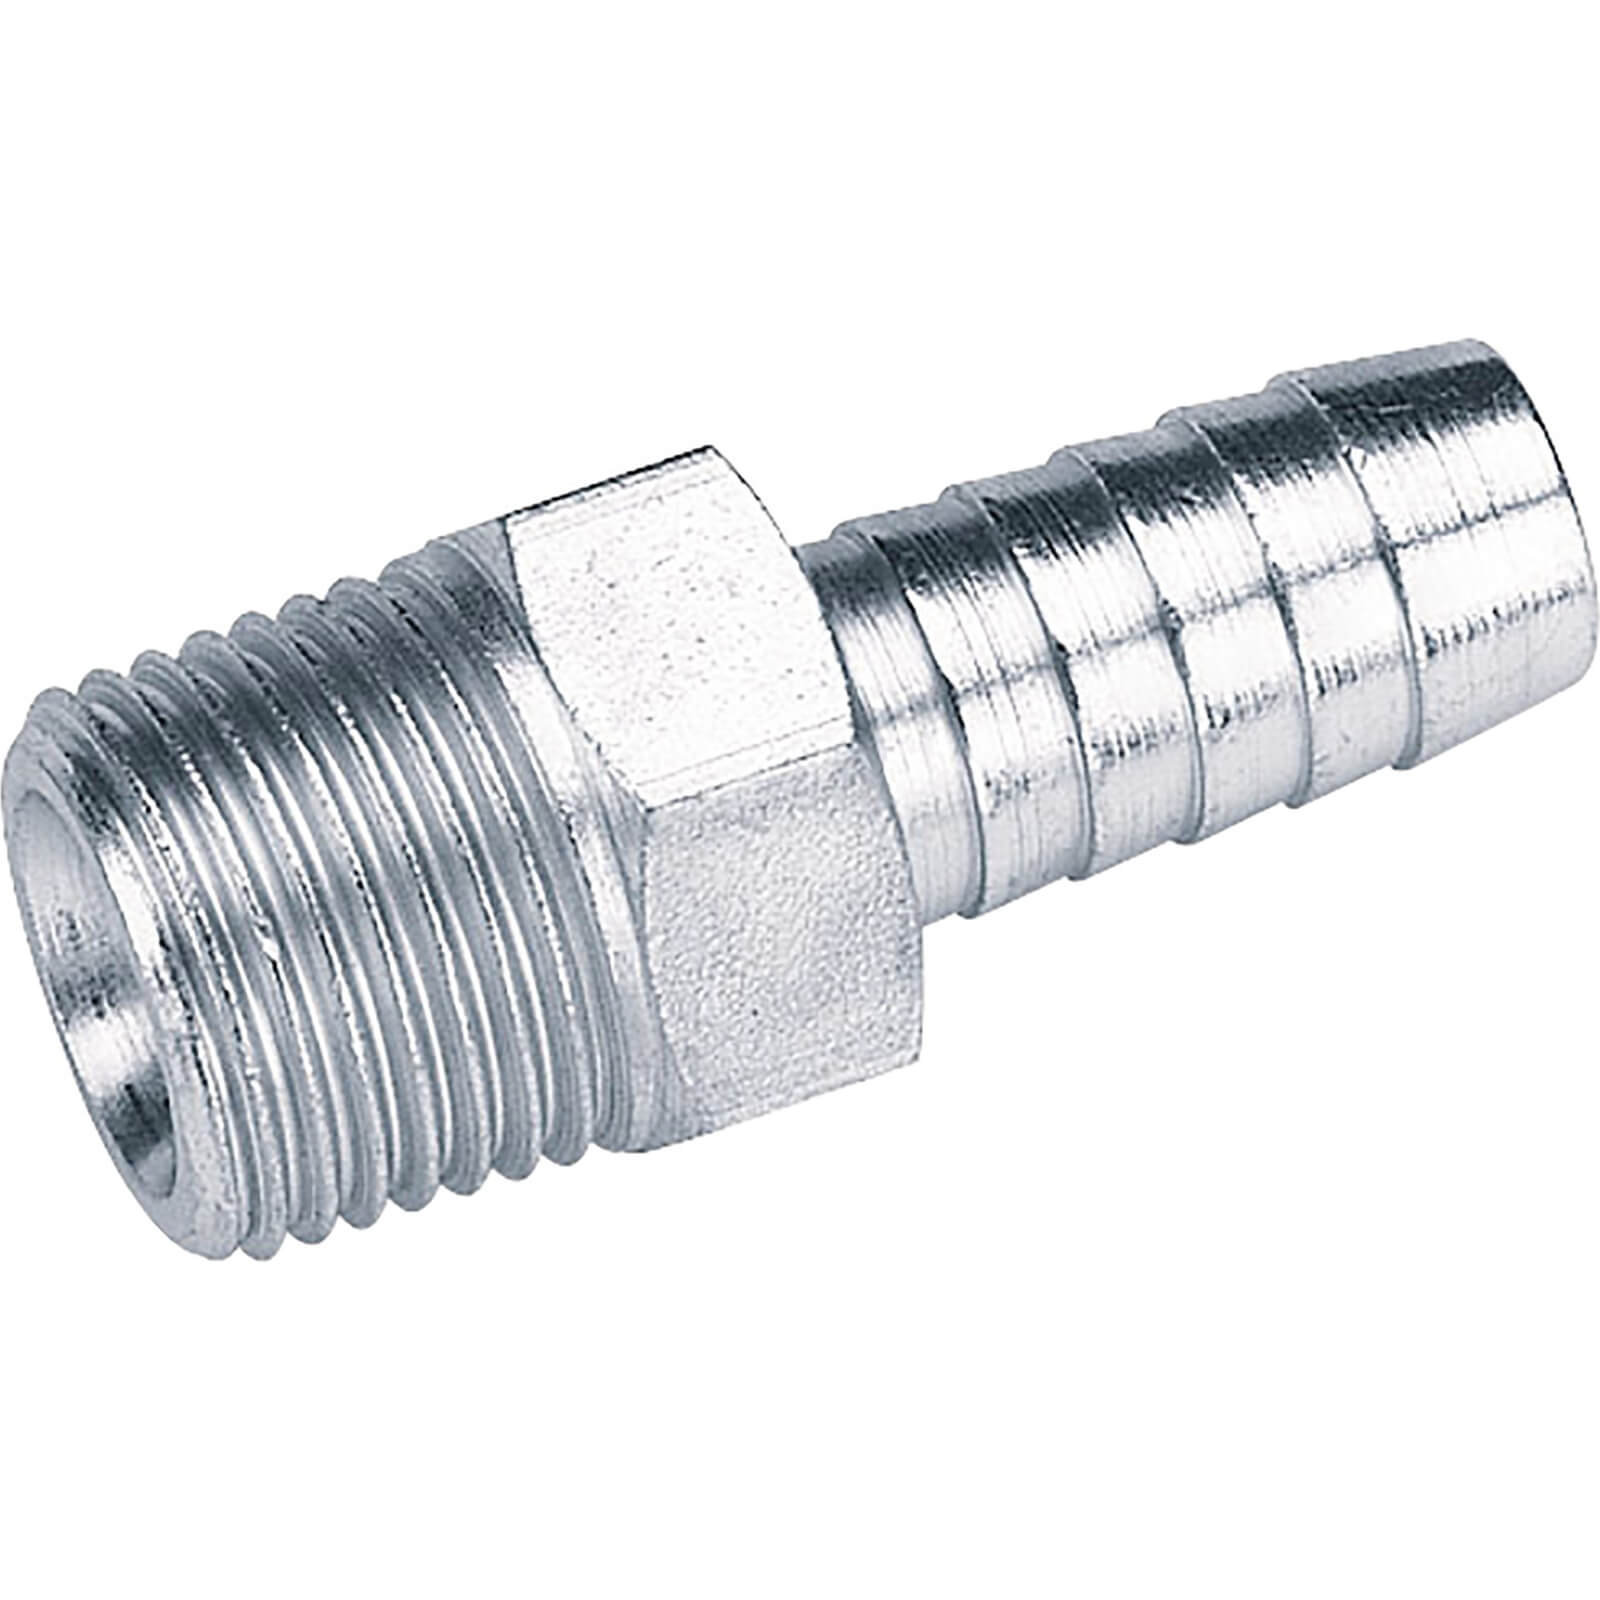 Photos - Equipment Accessory Draper PCL Tailpiece Air Line Fitting BSPT Male Thread 1/2" BSP 1/2" Pack 